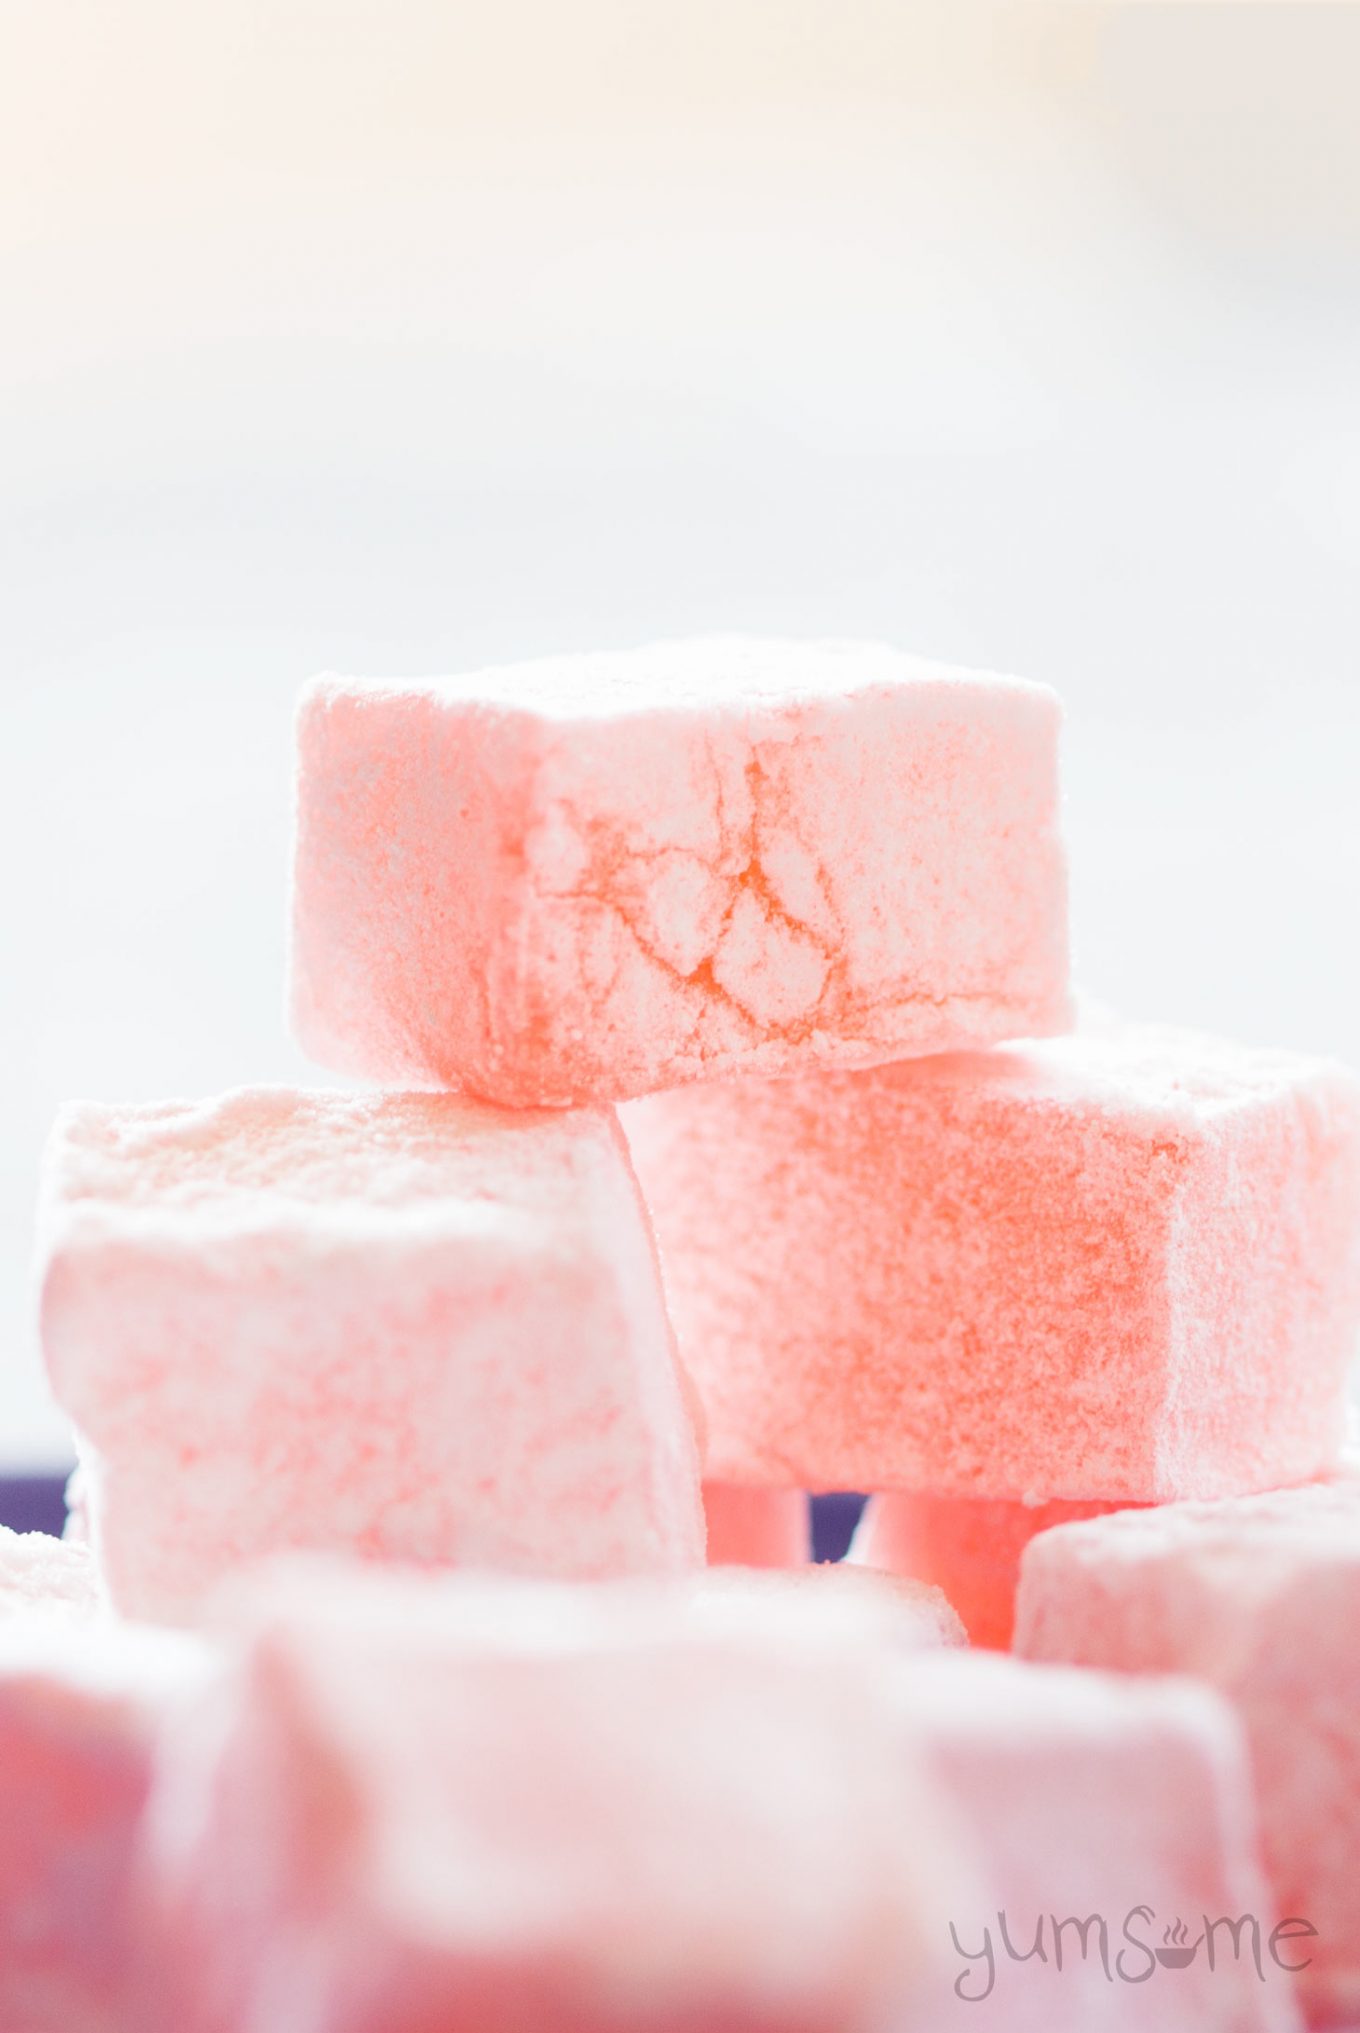 a stack of pink Turkish delight.